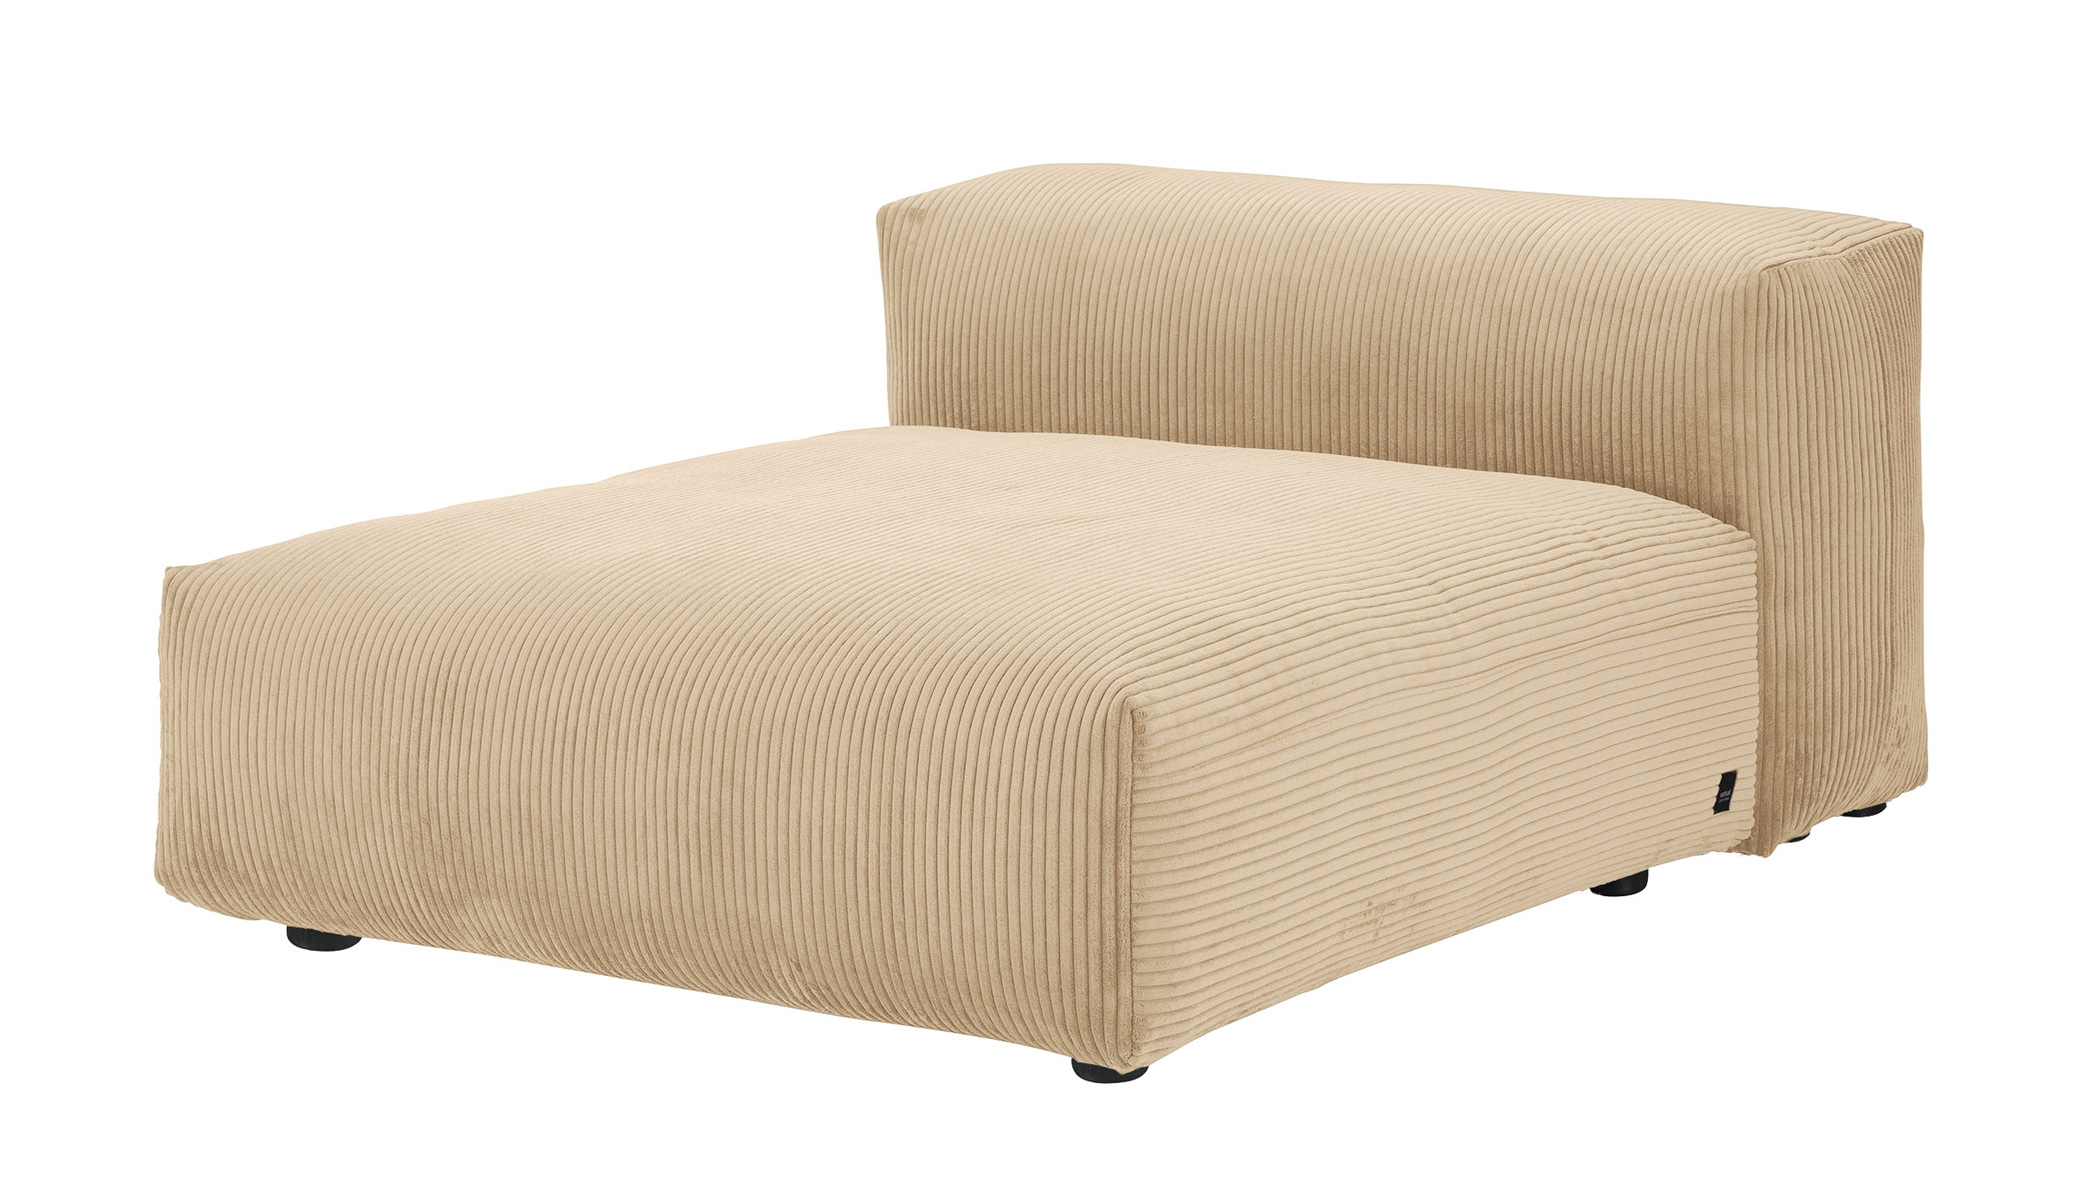  Sofa 1 Large 1 Side  Cord Velours sand